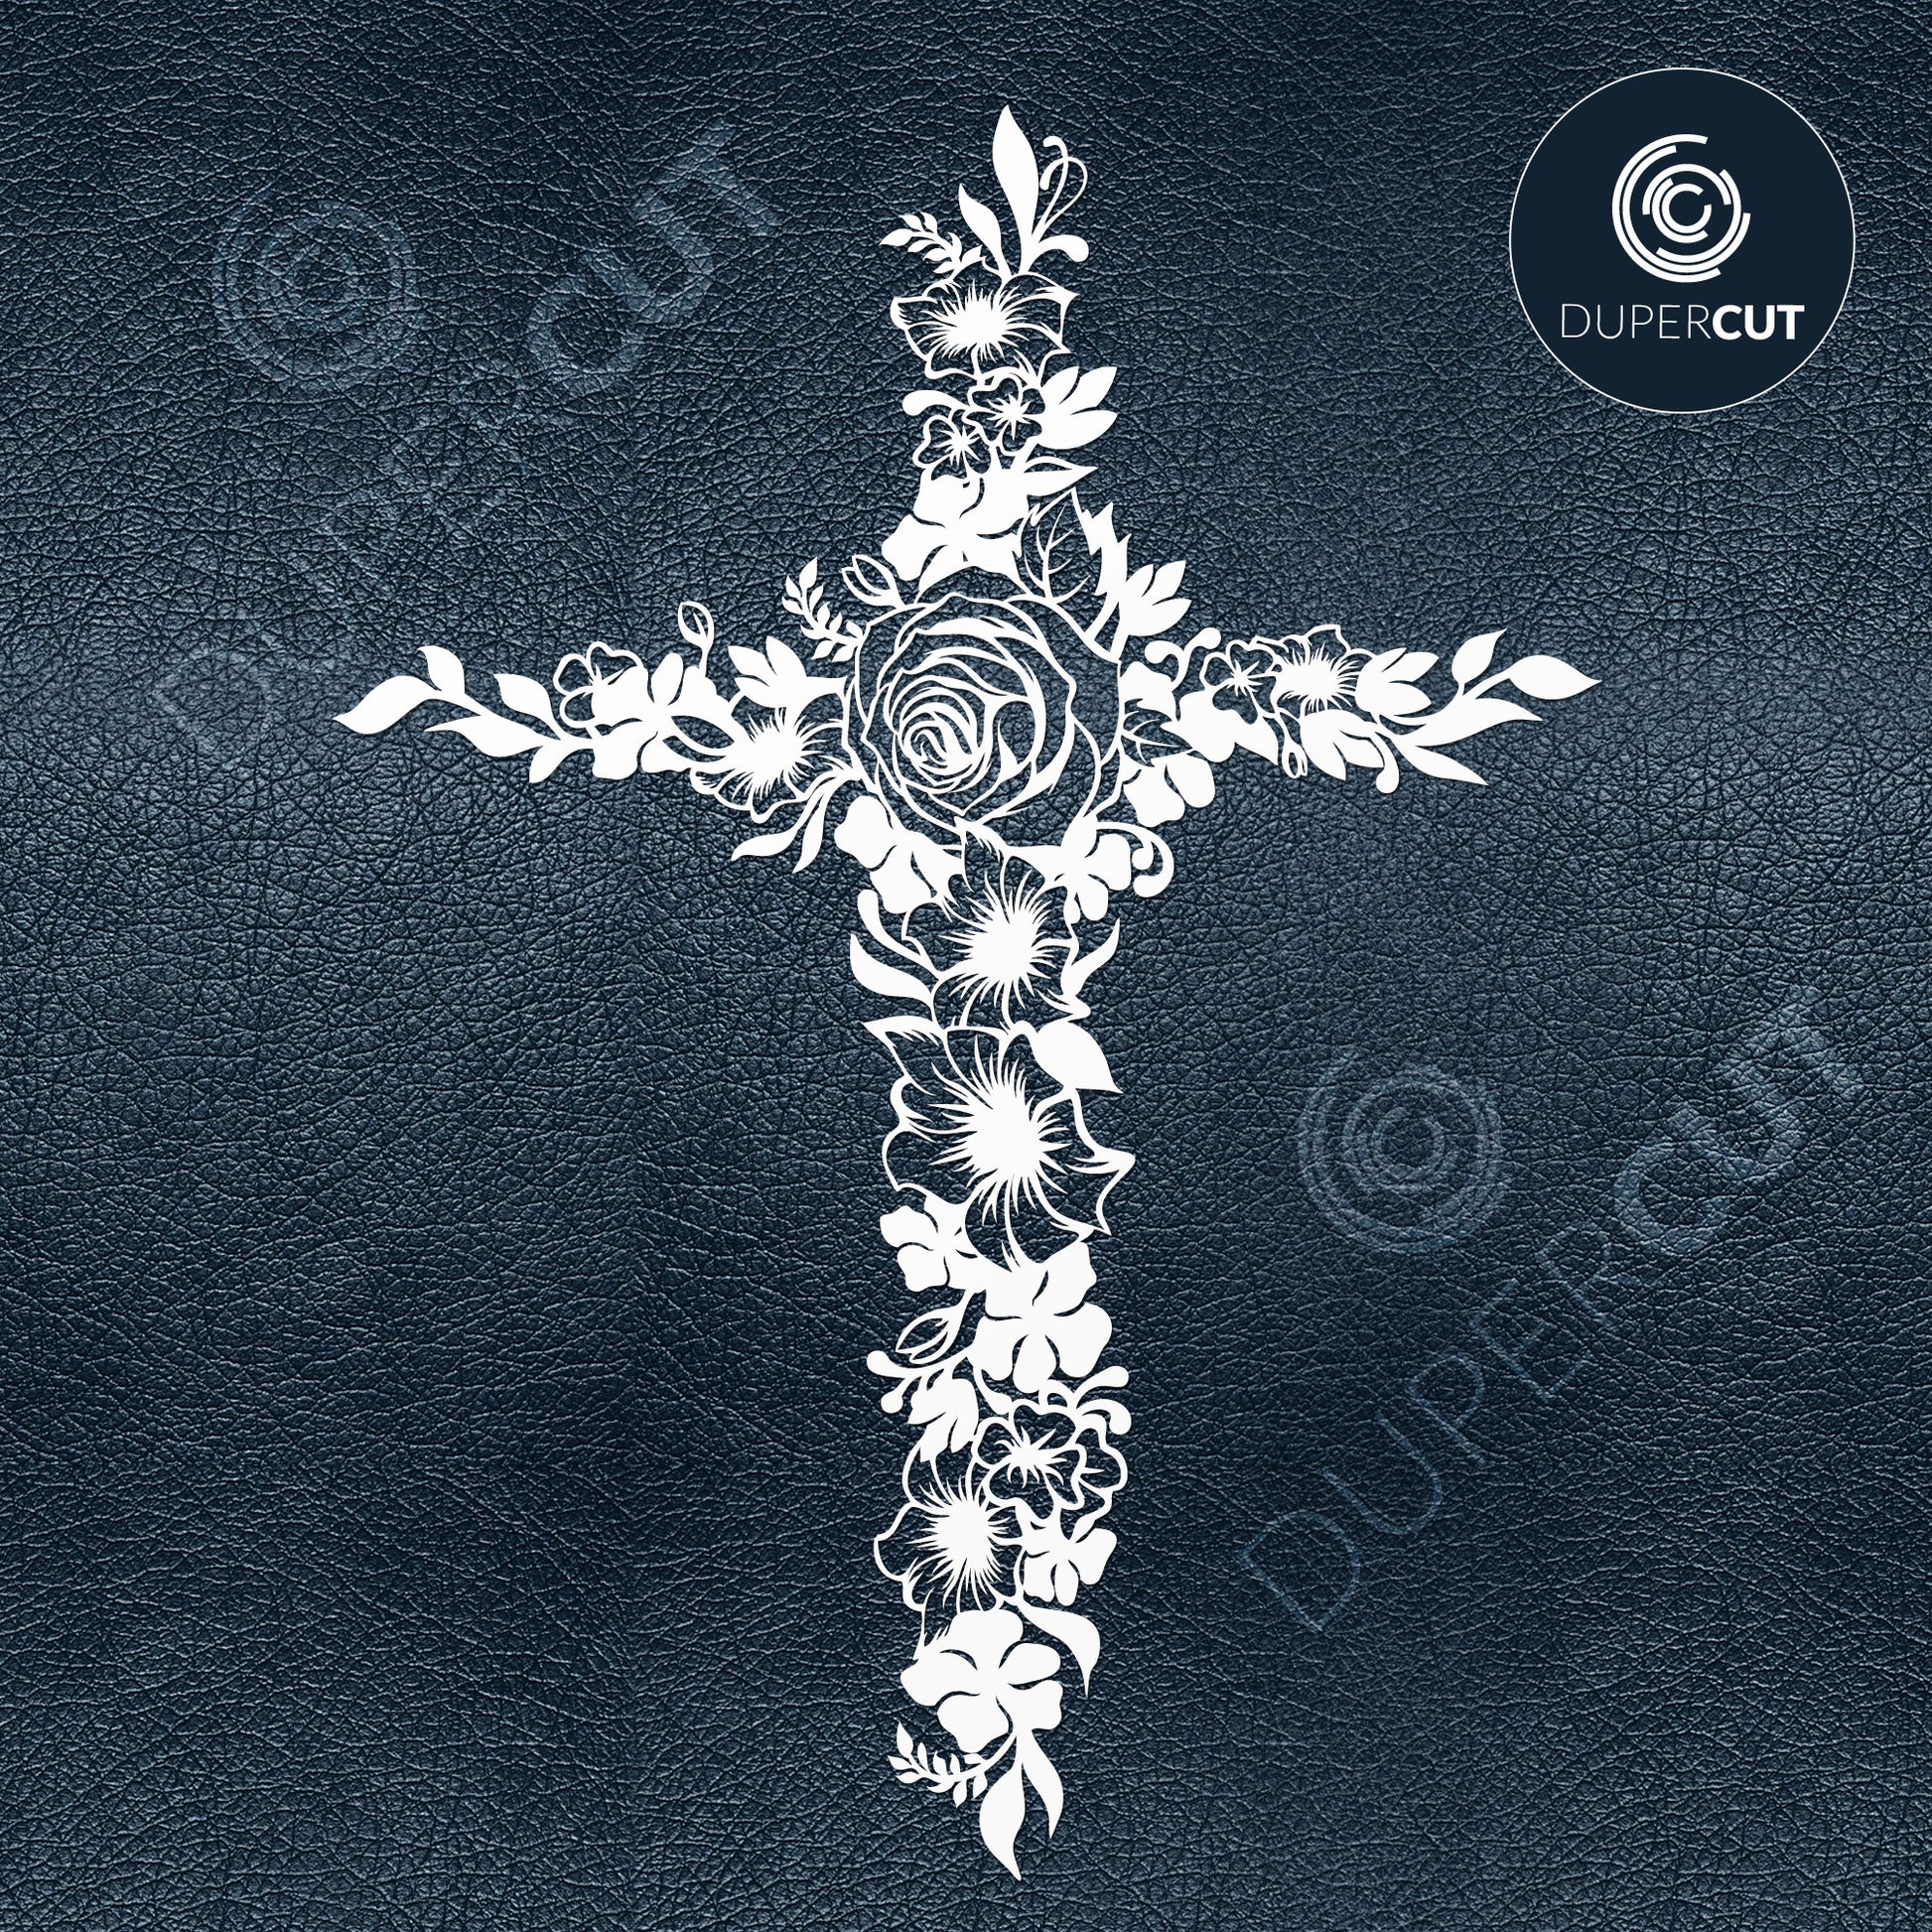 Floral Easter cross - SVG DXF vector files for laser cutting and engraving by DuperCut.com